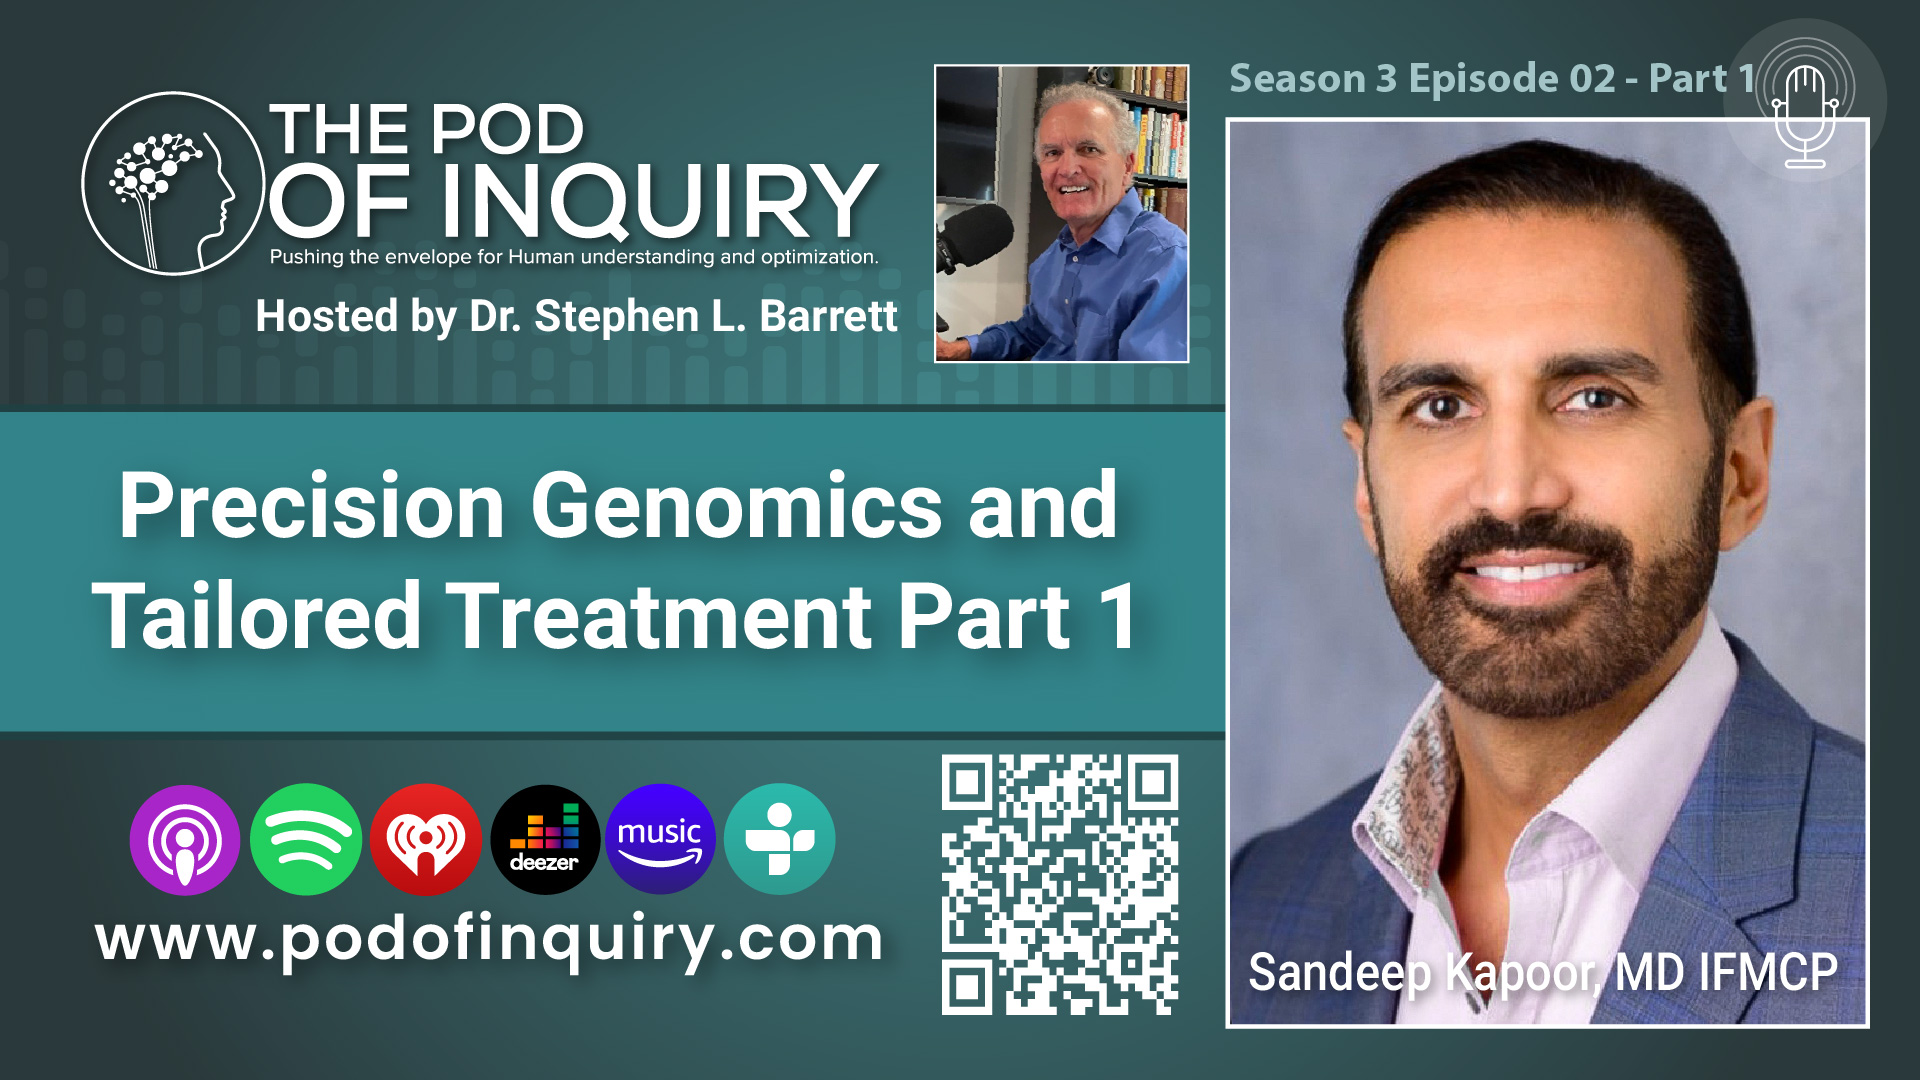 Precision Genomics and Tailored Treatment P1 w Sandeep Kapoor, MD IFMCP